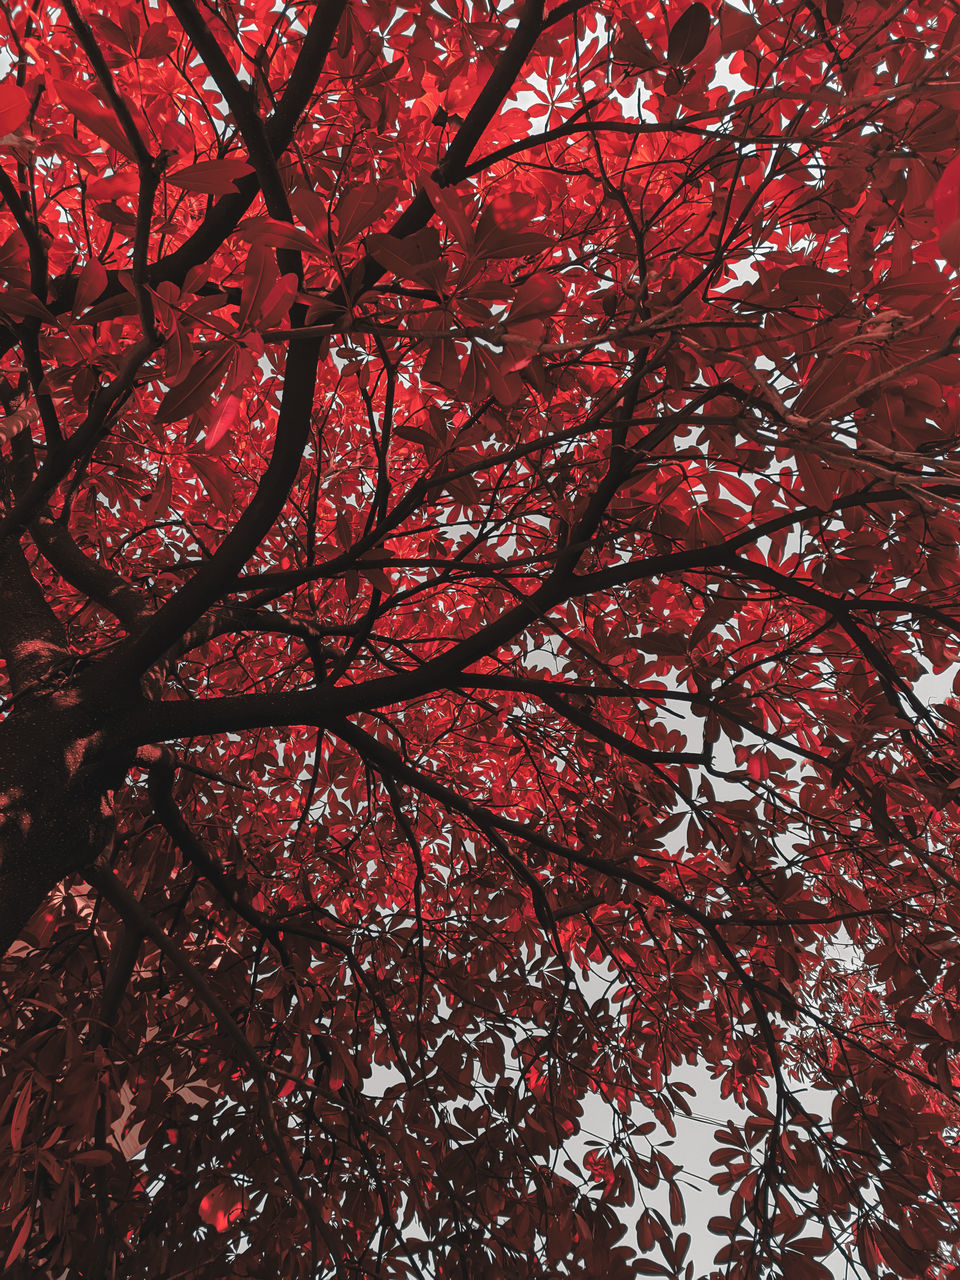 LOW ANGLE VIEW OF RED FLOWERING TREE